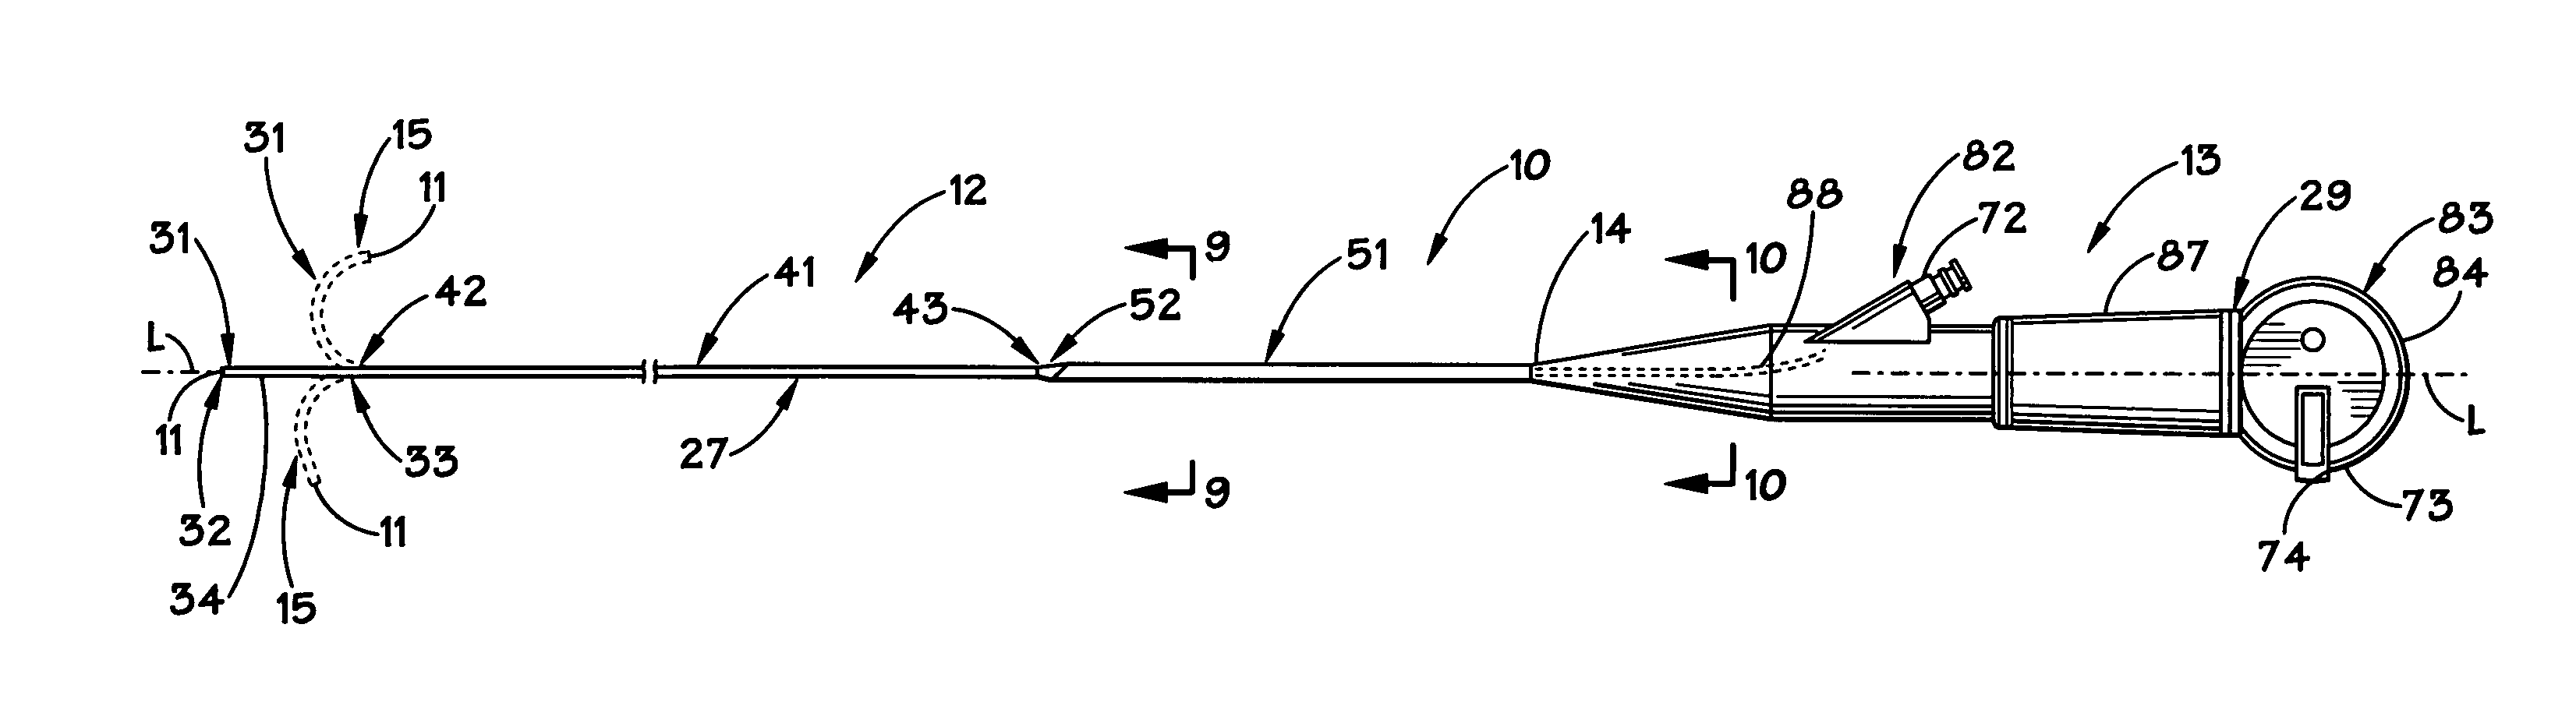 System, apparatus, and method for viewing a visually obscured portion of a cavity